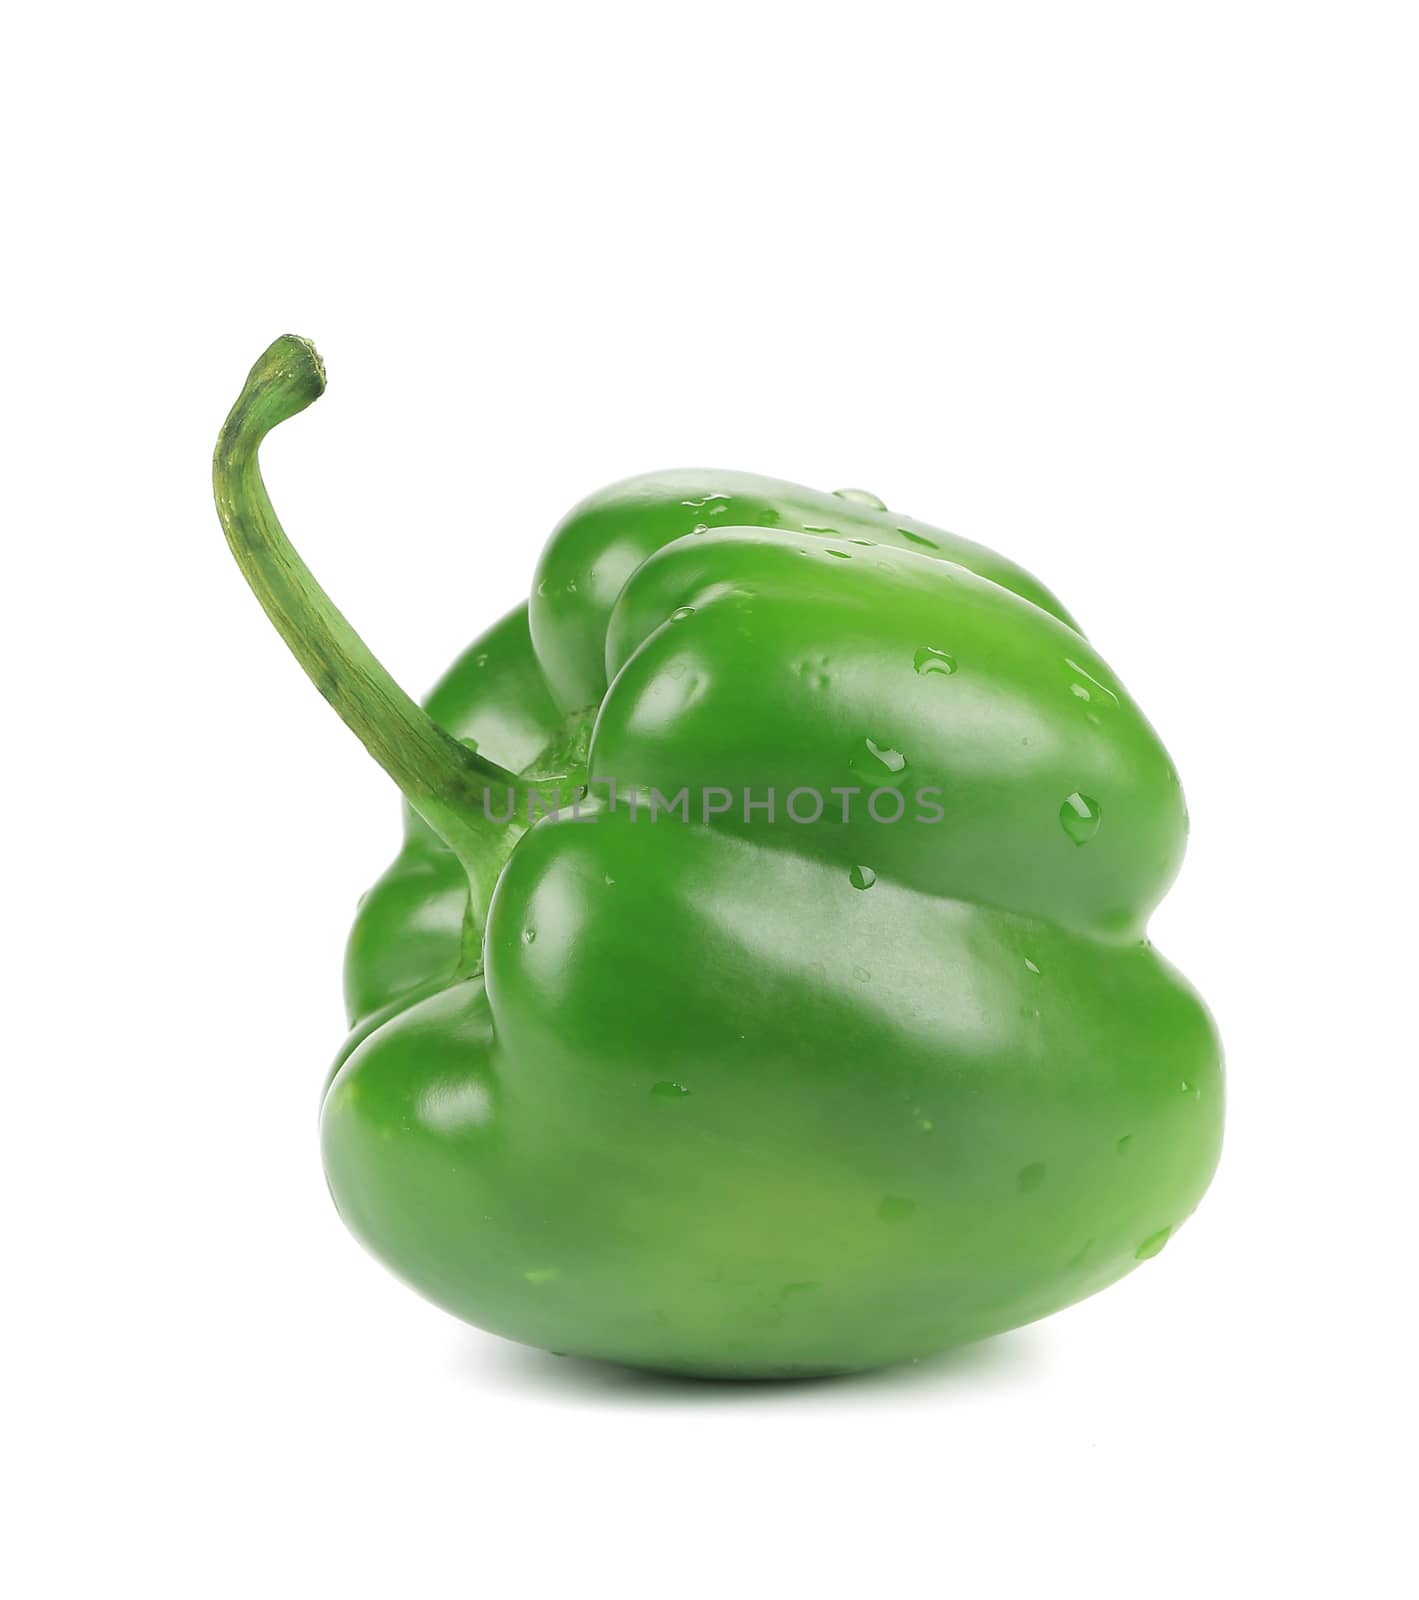 Sweet green pepper. by indigolotos